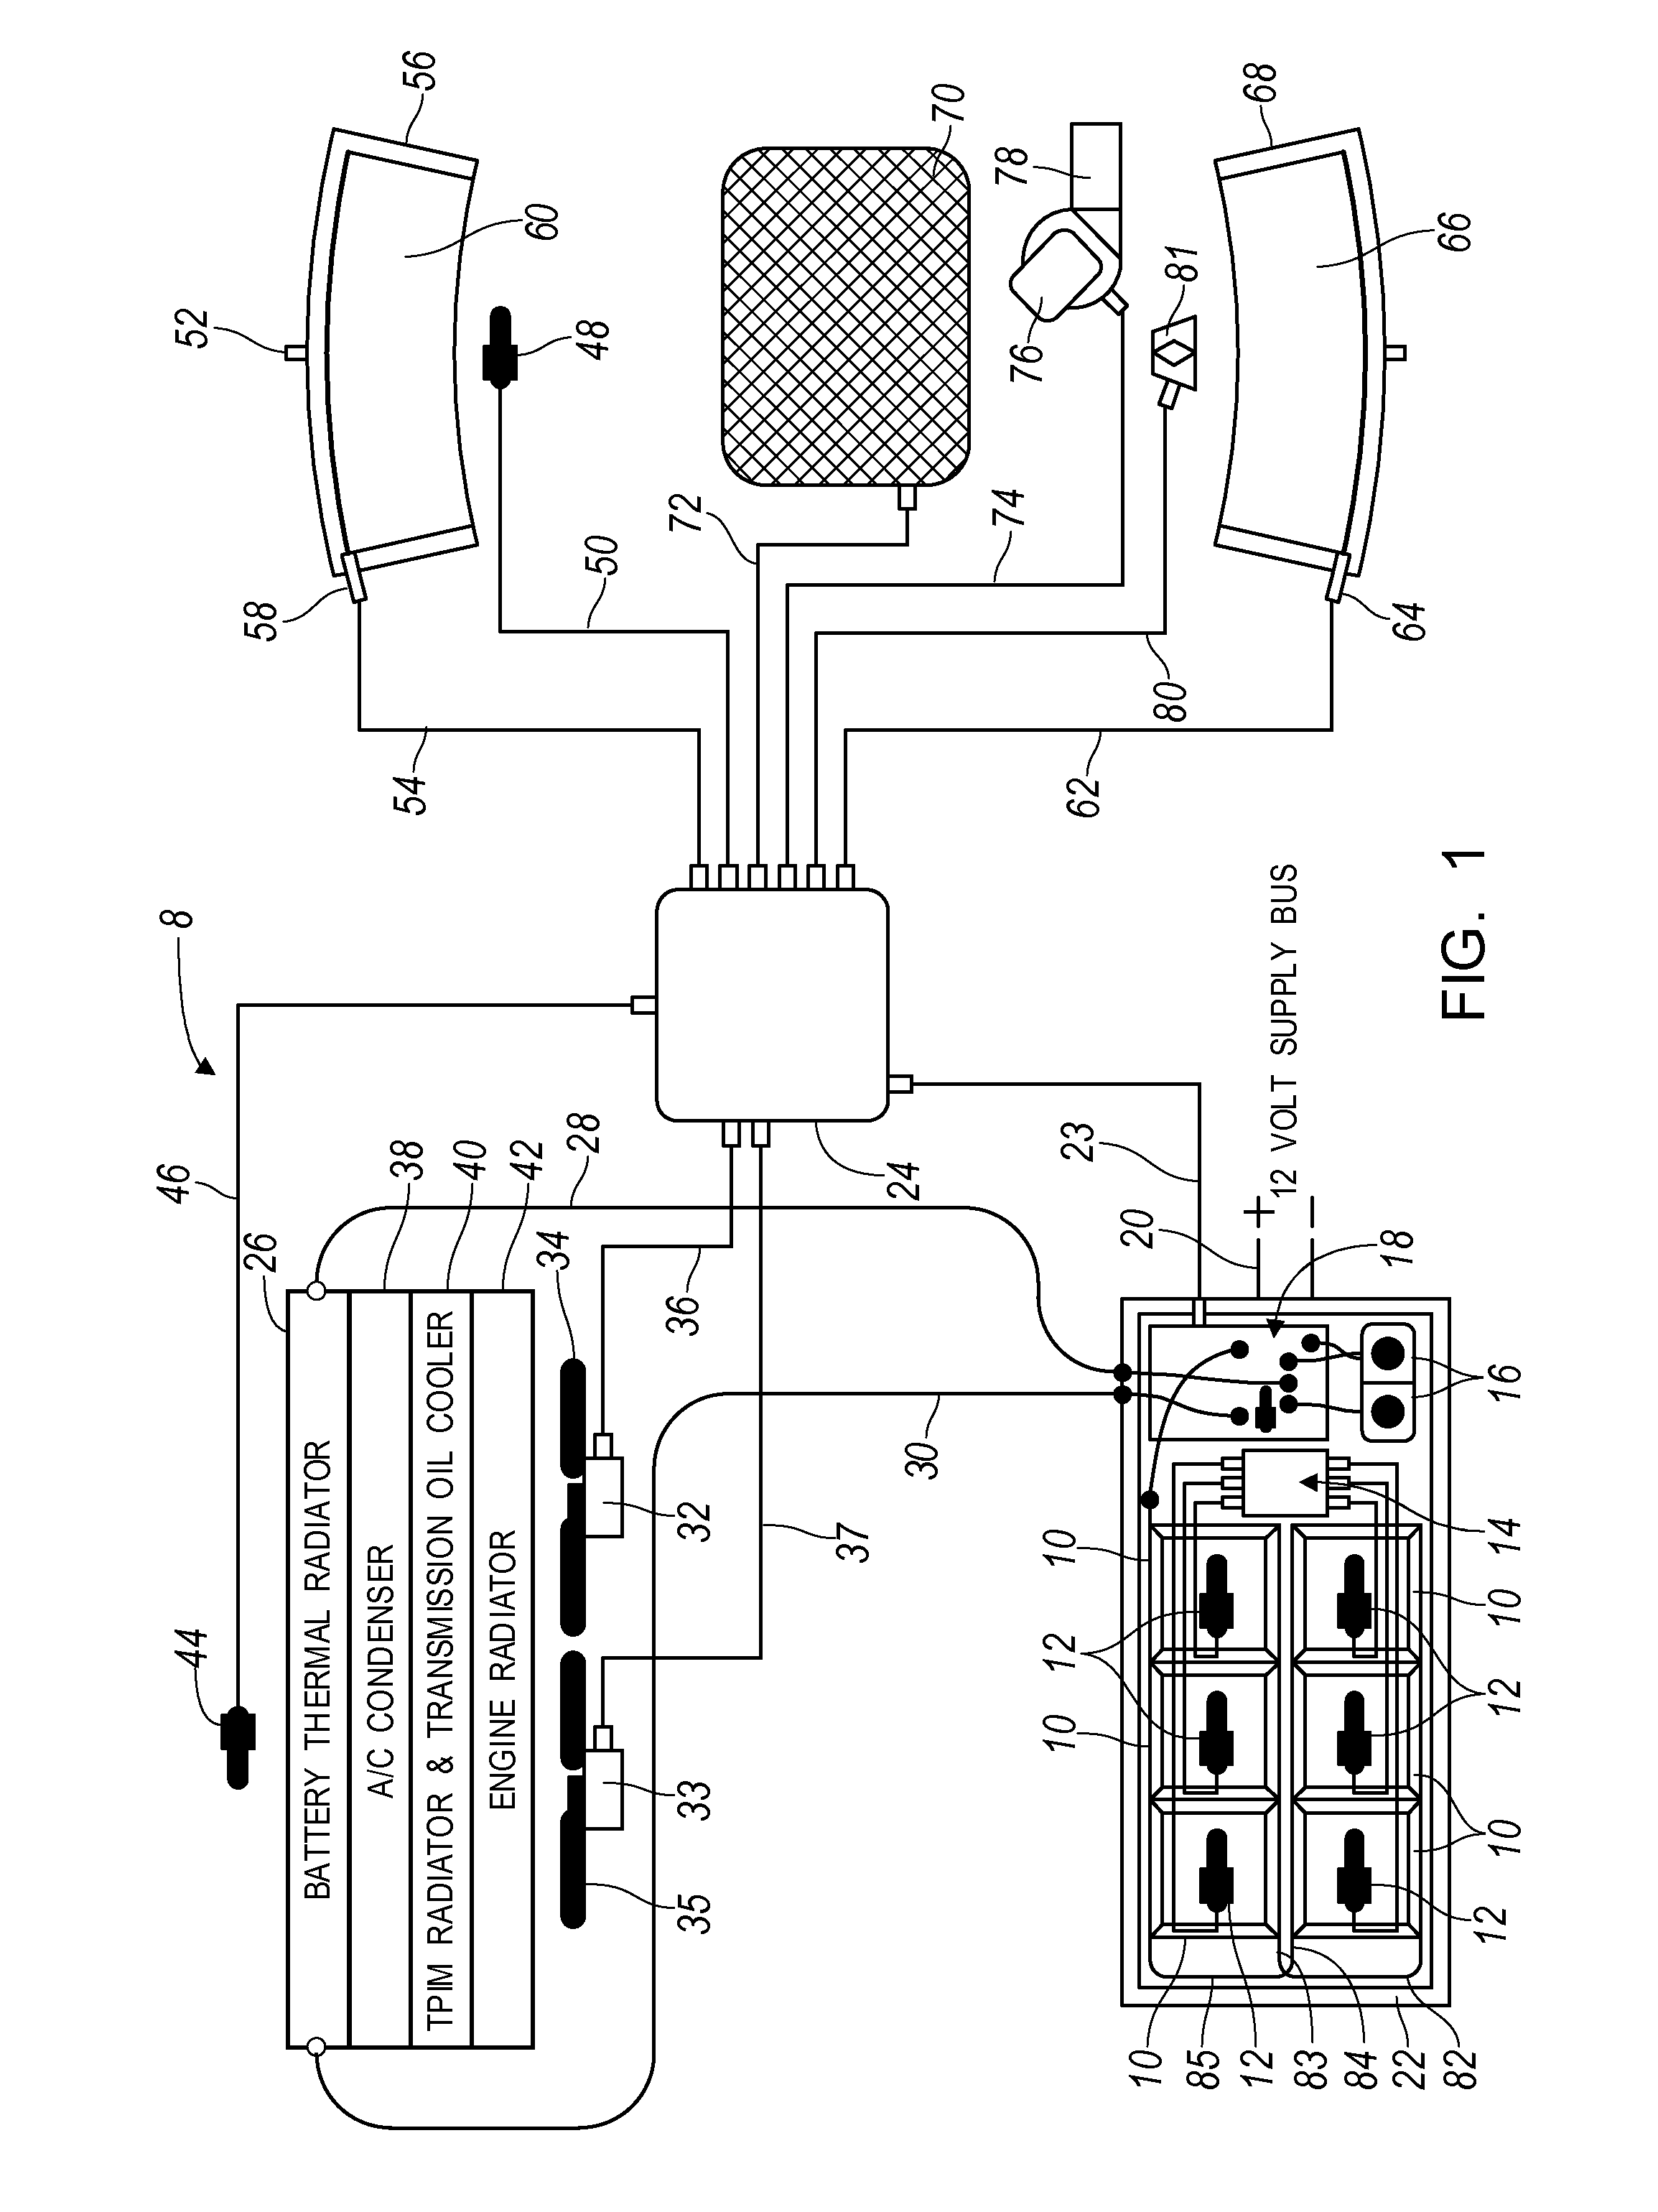 Temperature control of a vehicle battery